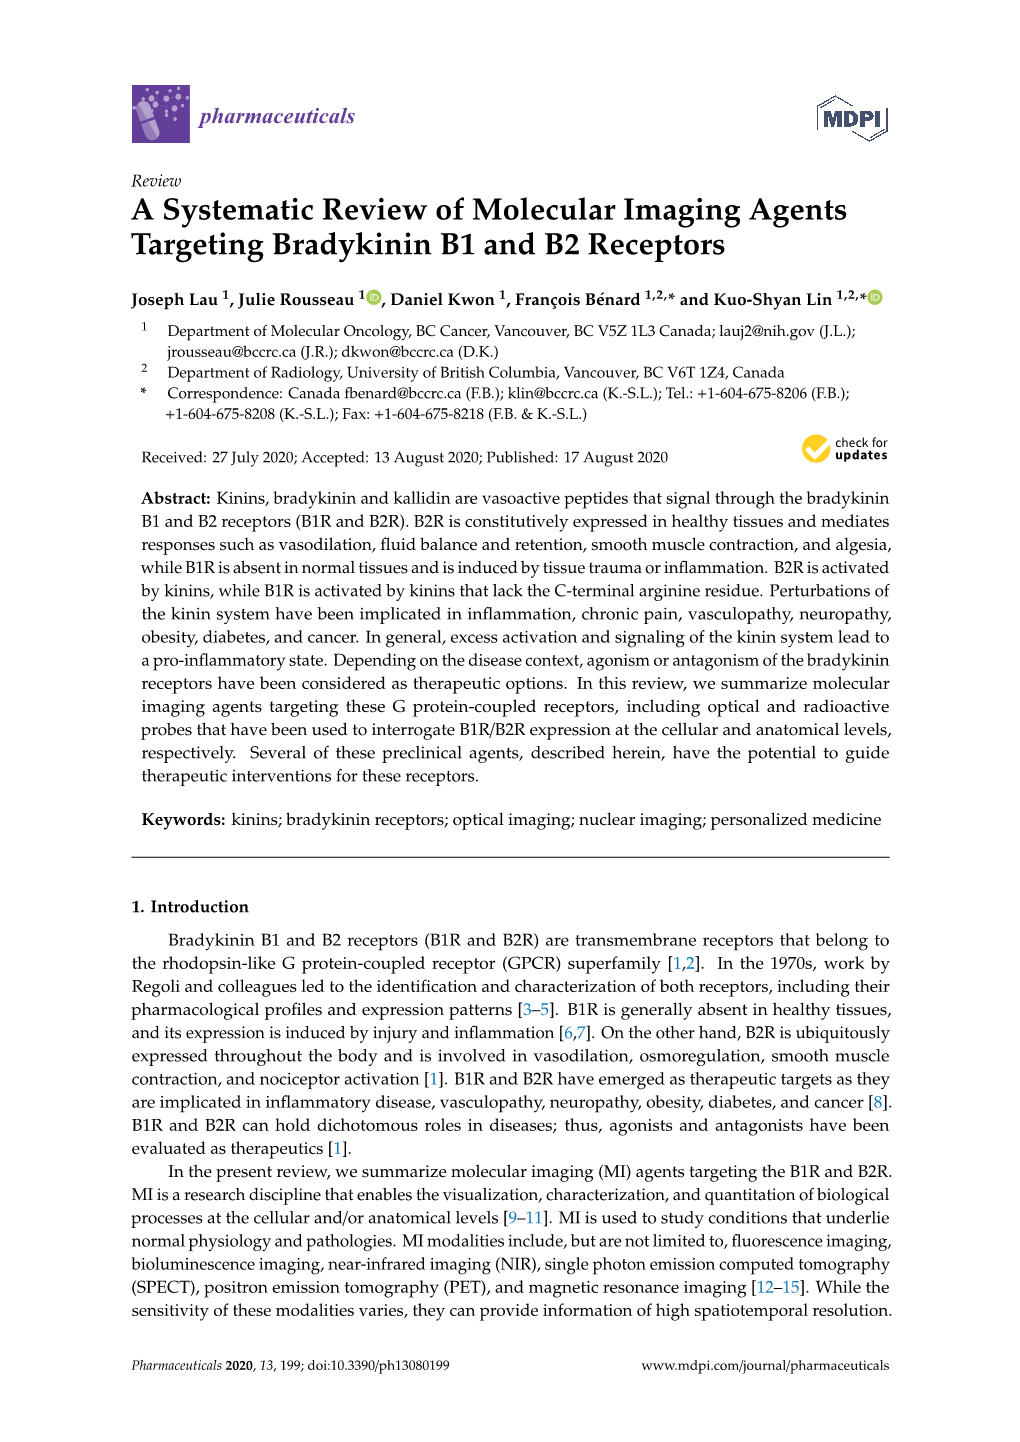 A Systematic Review of Molecular Imaging Agents Targeting Bradykinin B1 and B2 Receptors